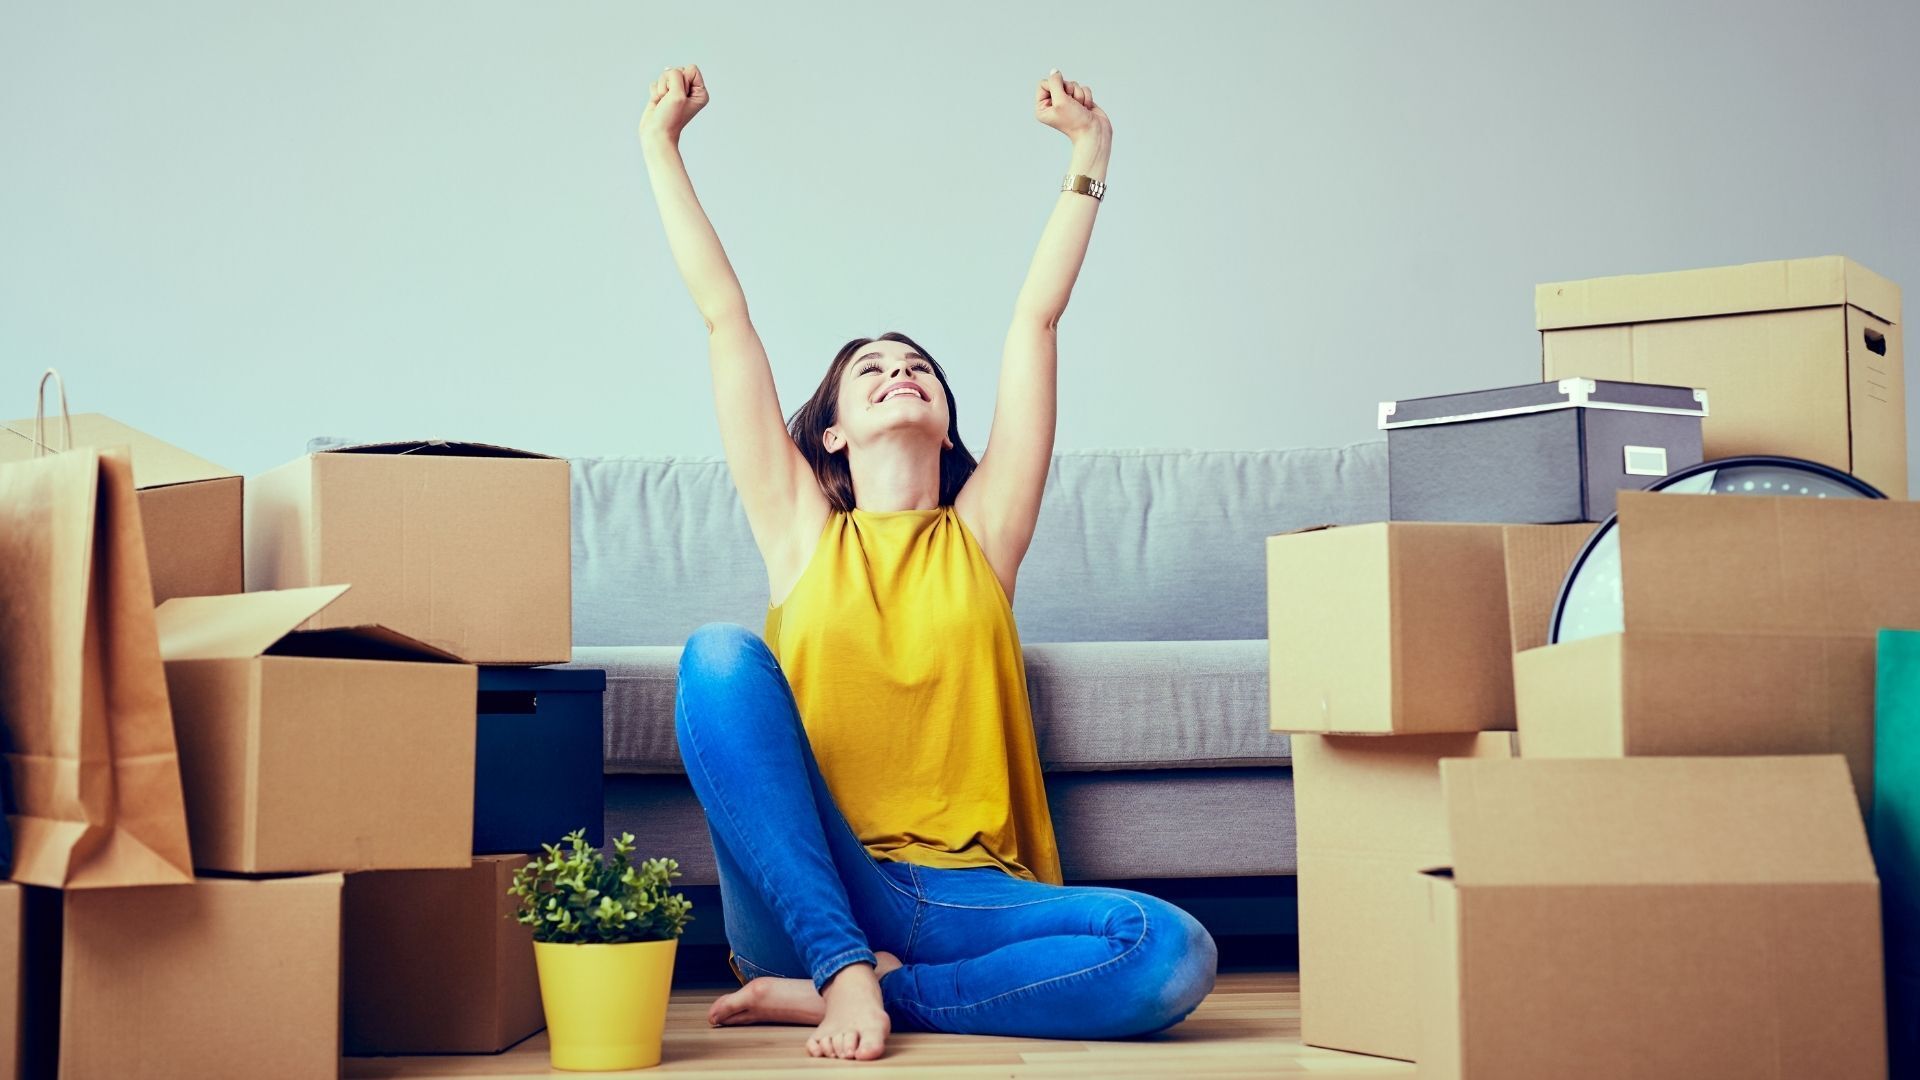 Girl sitting on the floor around multiple moving packages and raising both arms and stretching after